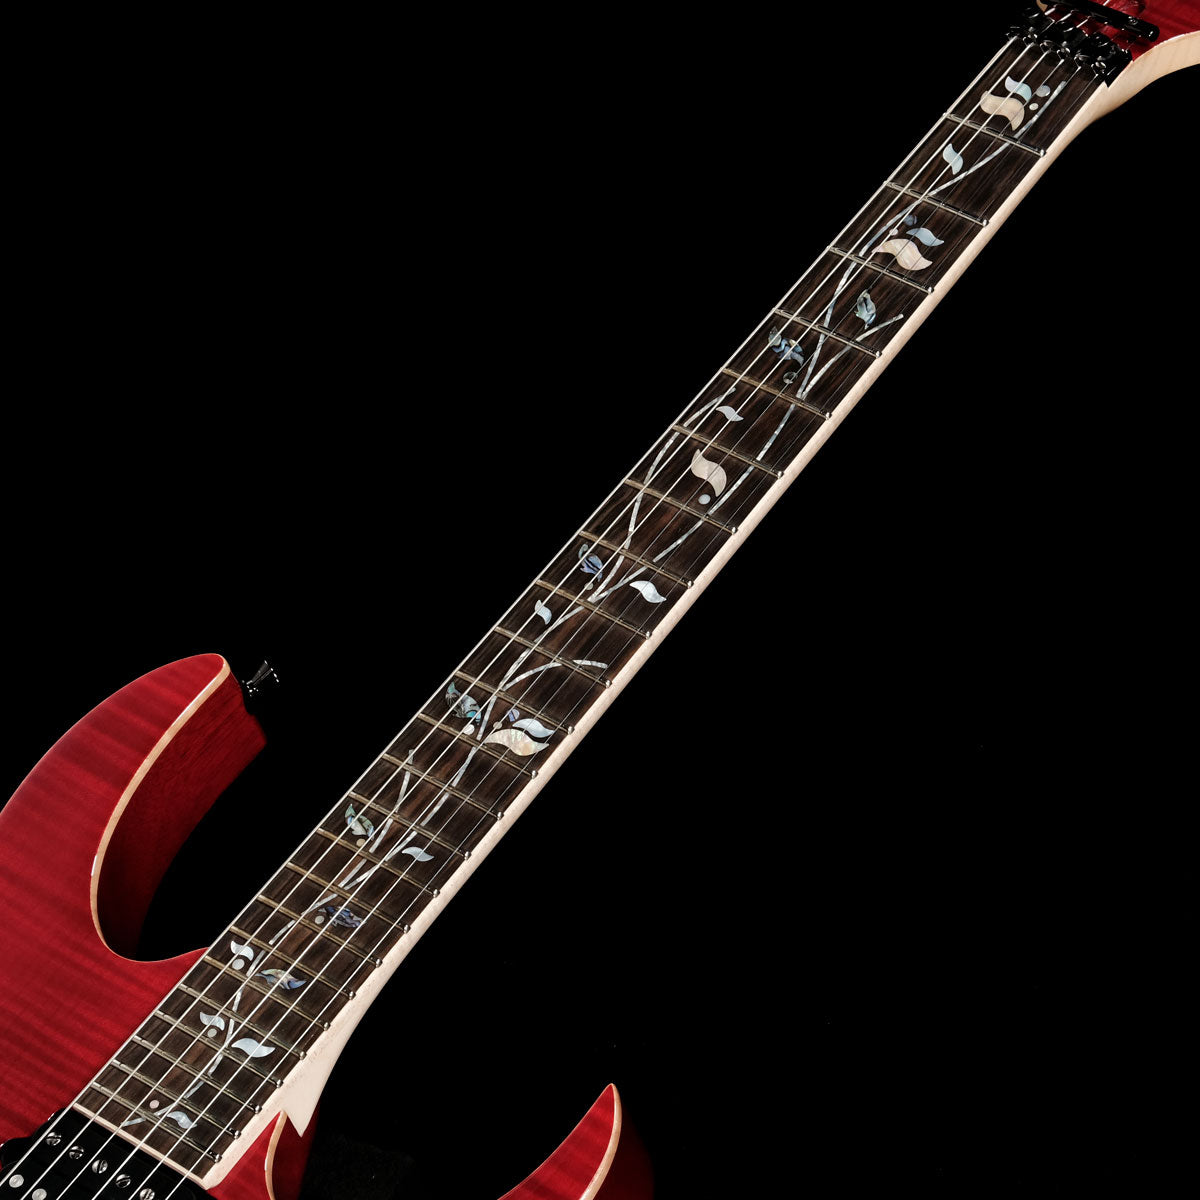 [SN F2313379] Ibanez / j.custom RG8570-RS (Red Spinel) Ibanez [2023 New Model] [05]